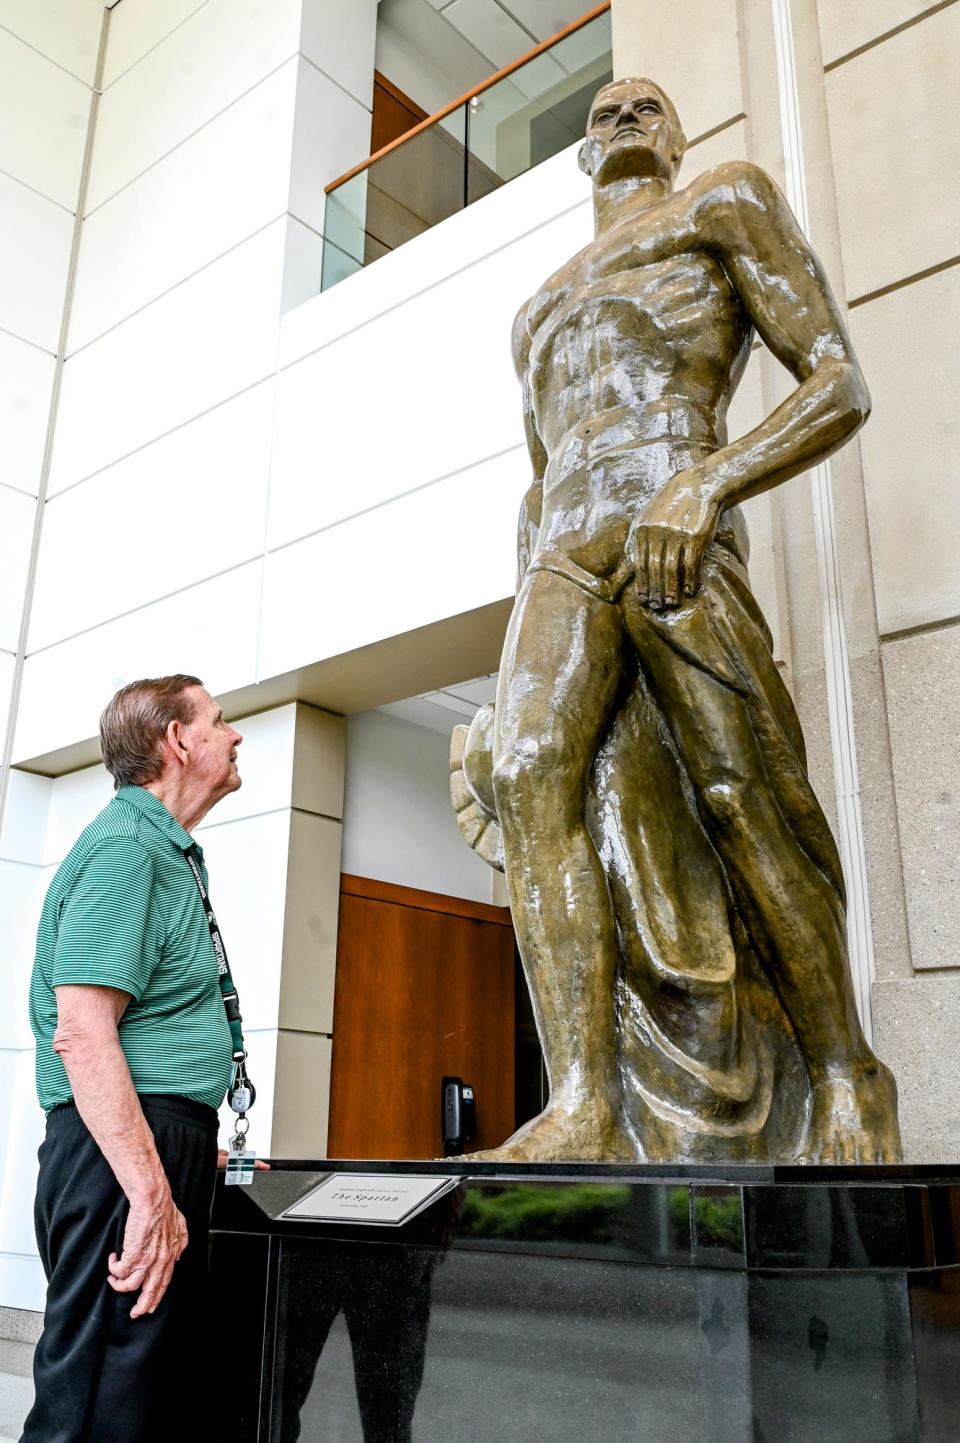 Cyrus Stewart, one of the first Sparty mascots, looks at the Sparty statue on Wednesday, June 14, 2023, at Spartan Stadium on the Michigan State University campus in East Lansing.